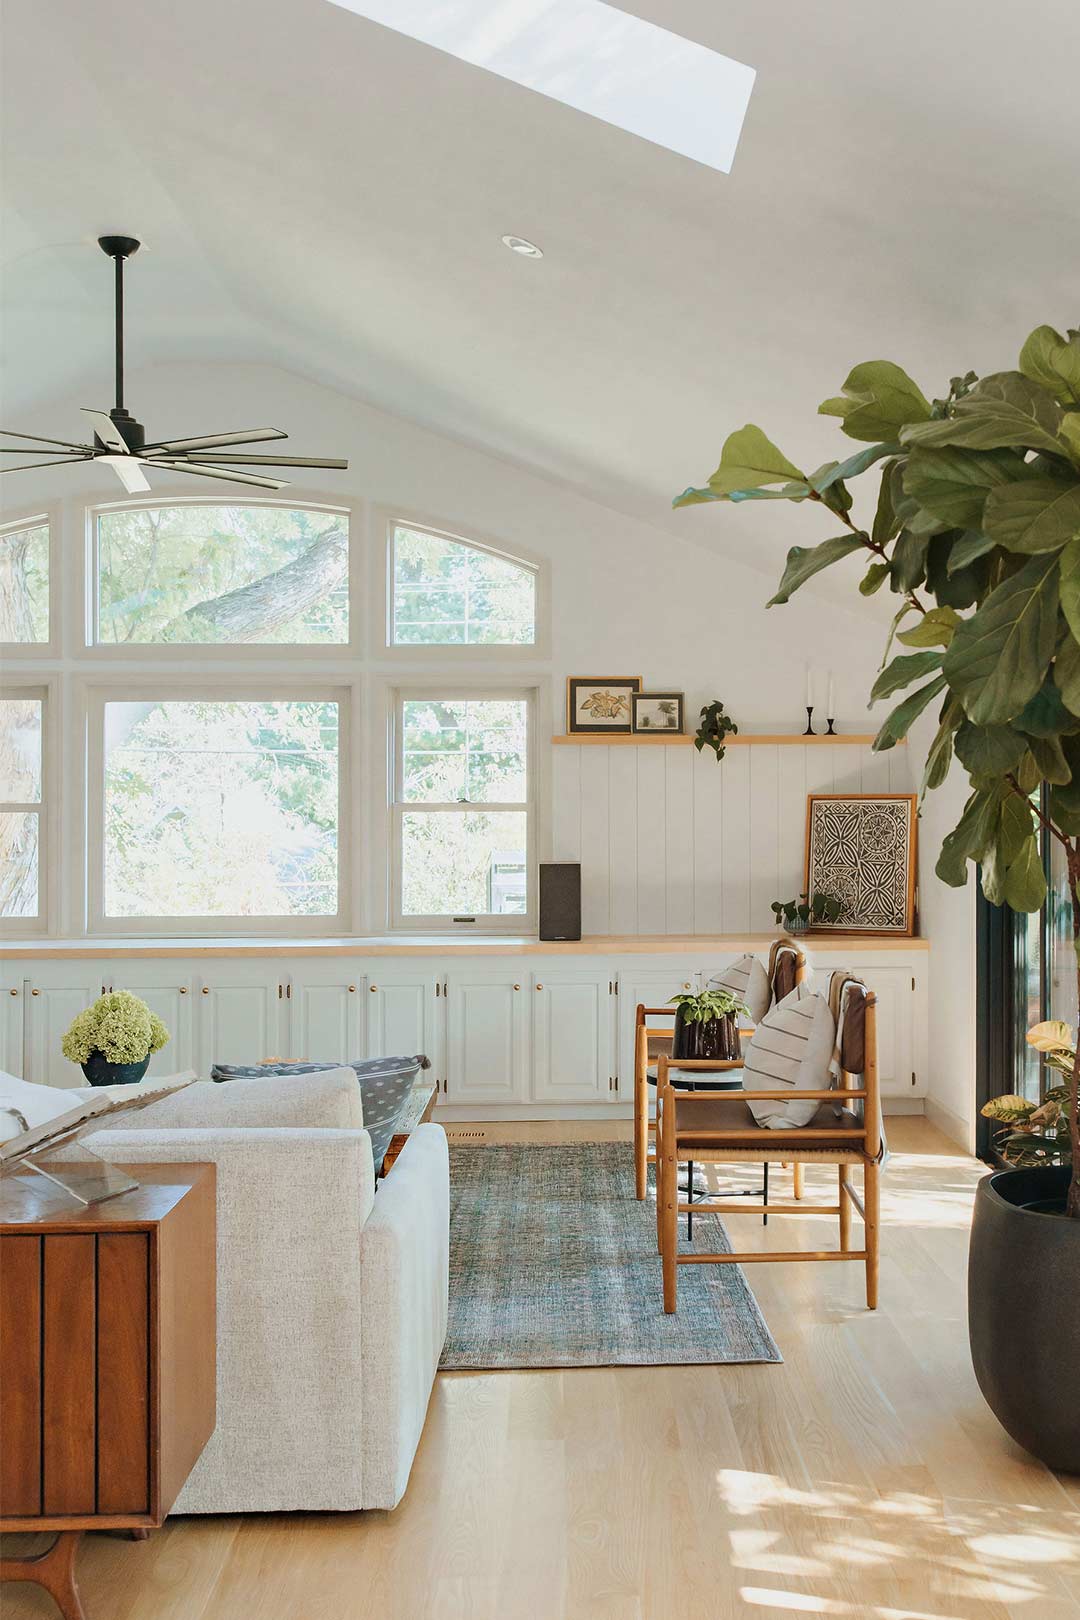 Bright Arched Windows frame a modern black ceiling fan at the top of this living room with a beautiful fiddle fig tree